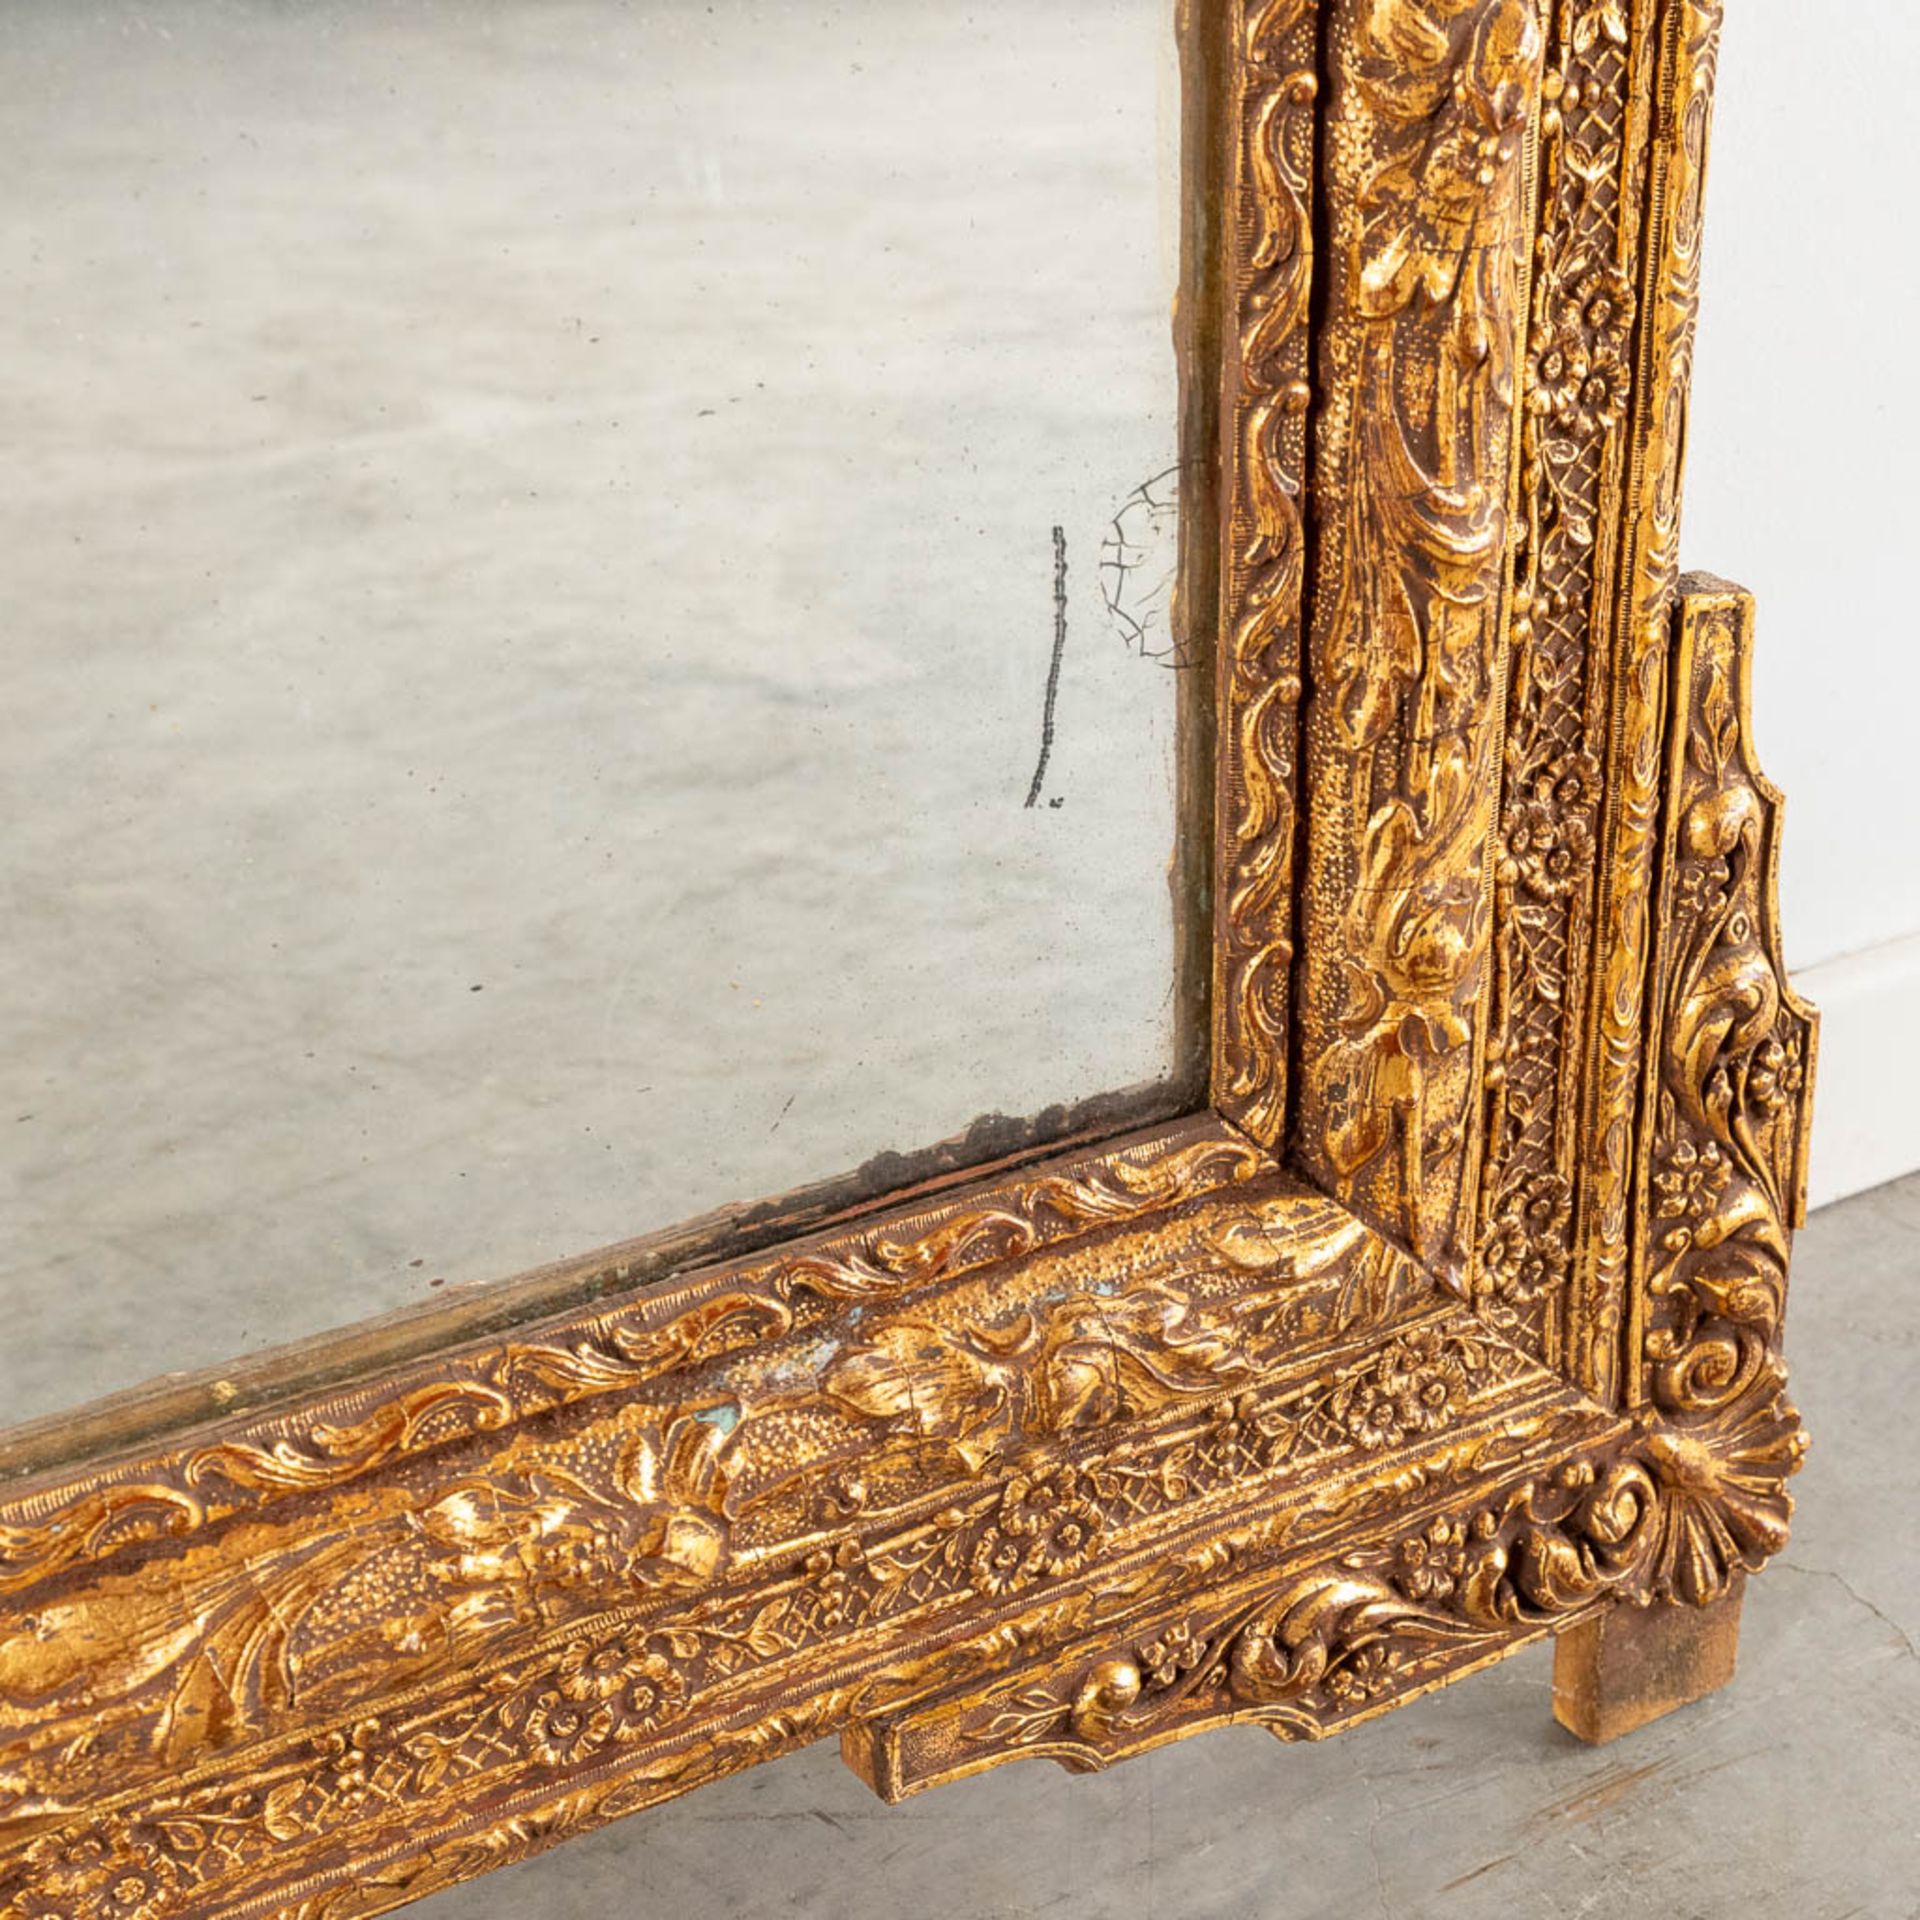 A mirror, sculptured wood and gilt stucco. Circa 1900. (W:135 x H:85 cm) - Image 6 of 8